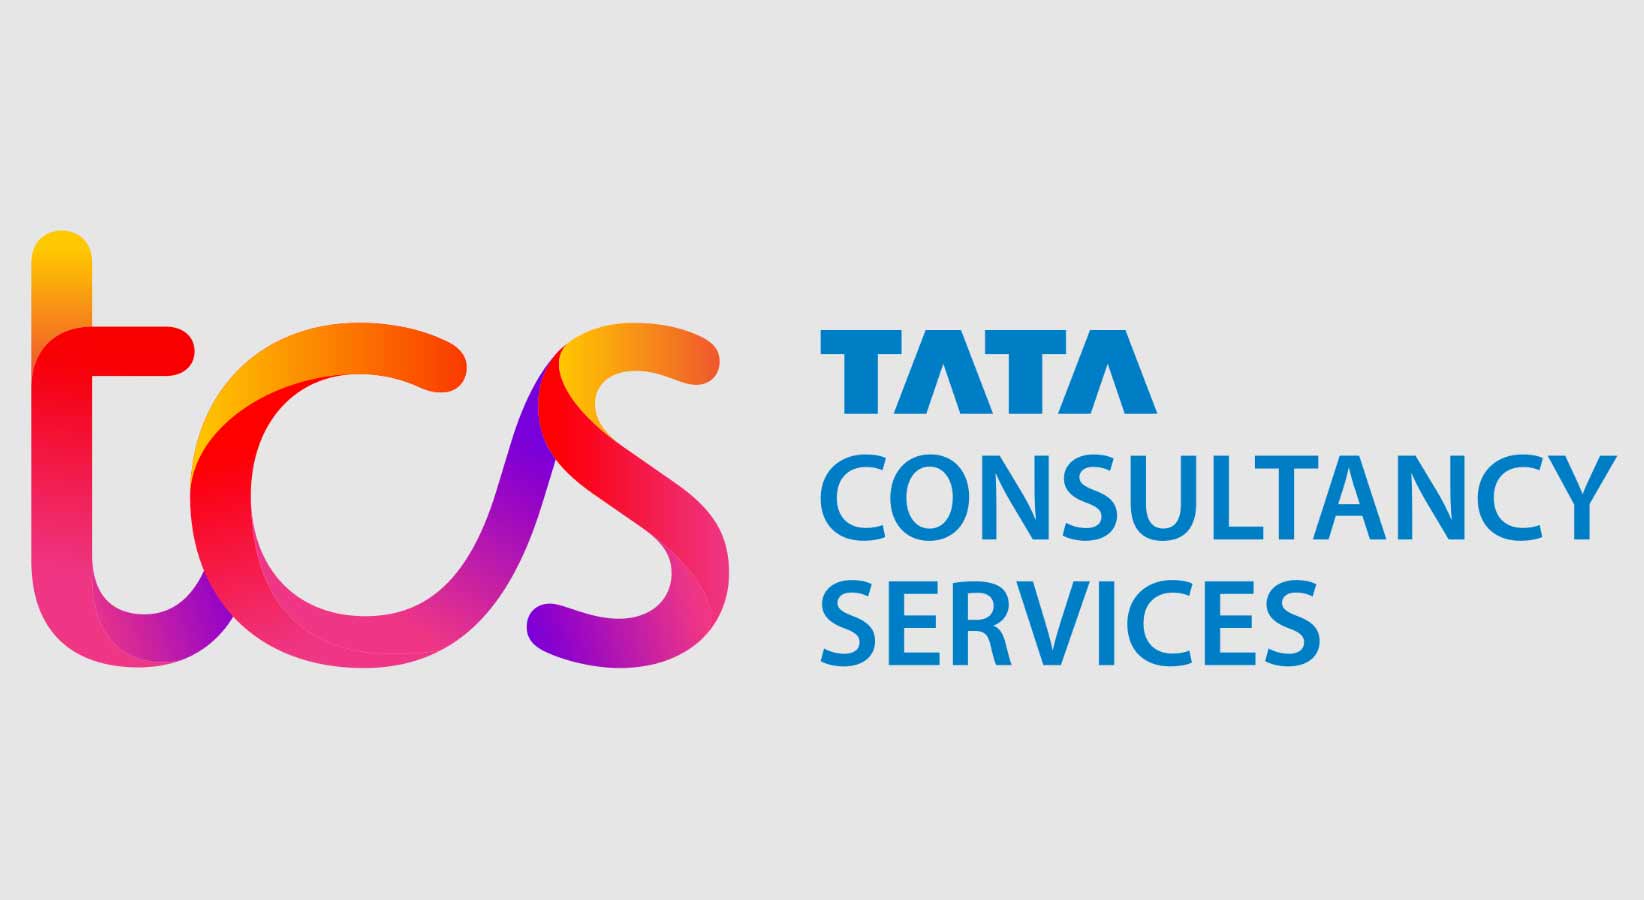 TCS has launched a cloud-based solution to measure environmental impact of products